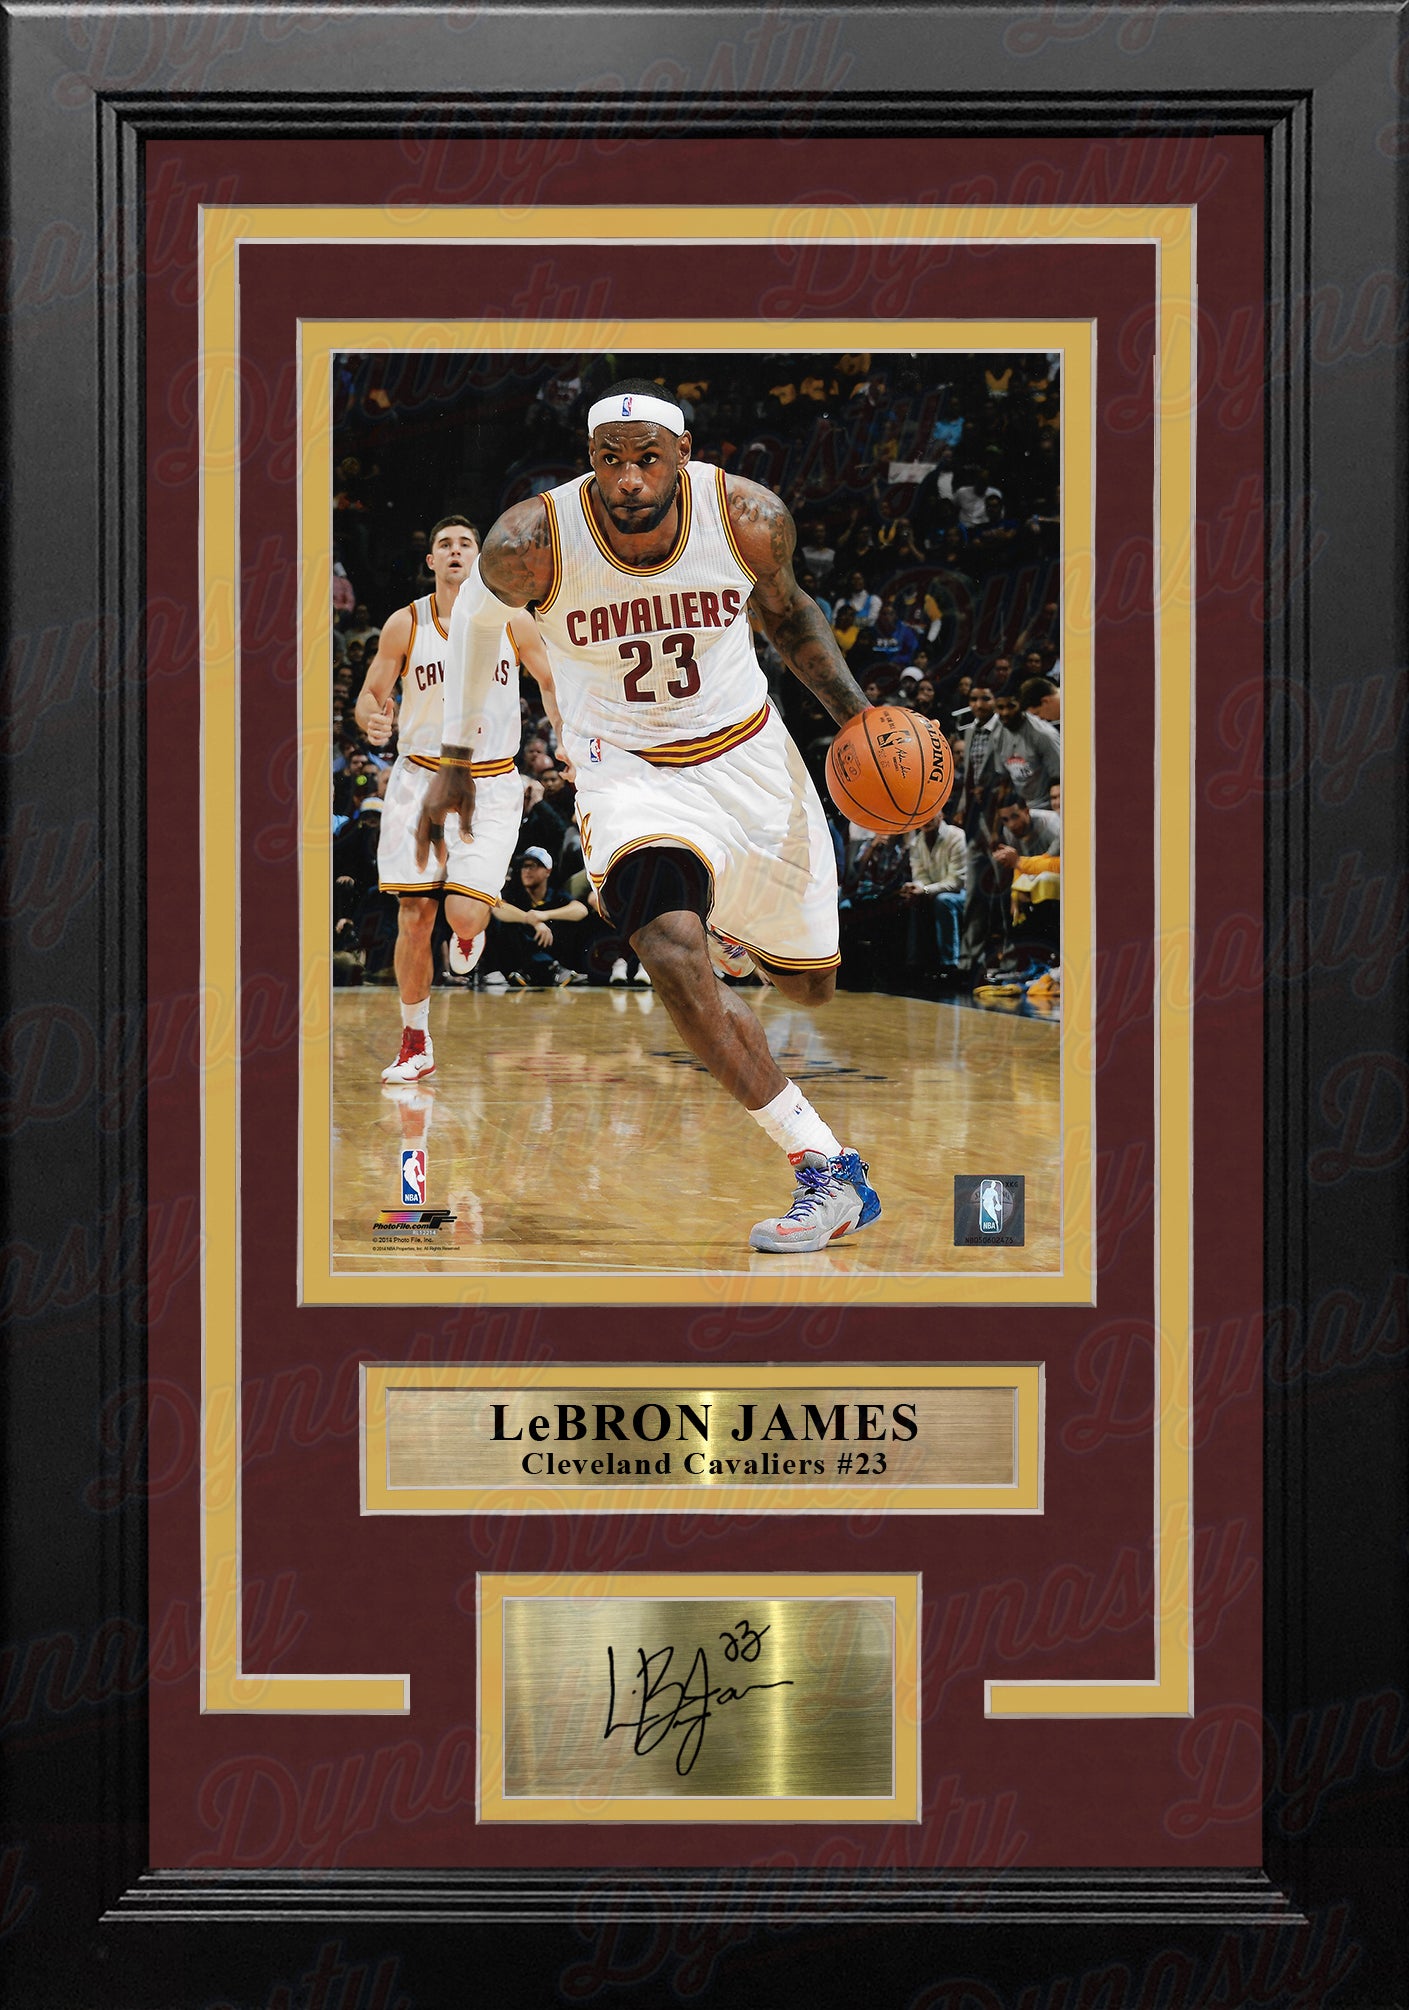 LeBron James Cleveland Cavaliers Framed 11 x 14 NBA Finals Game 7  Chasedown Block Moments Spotlight - Facsimile Signature - NBA Player  Plaques and